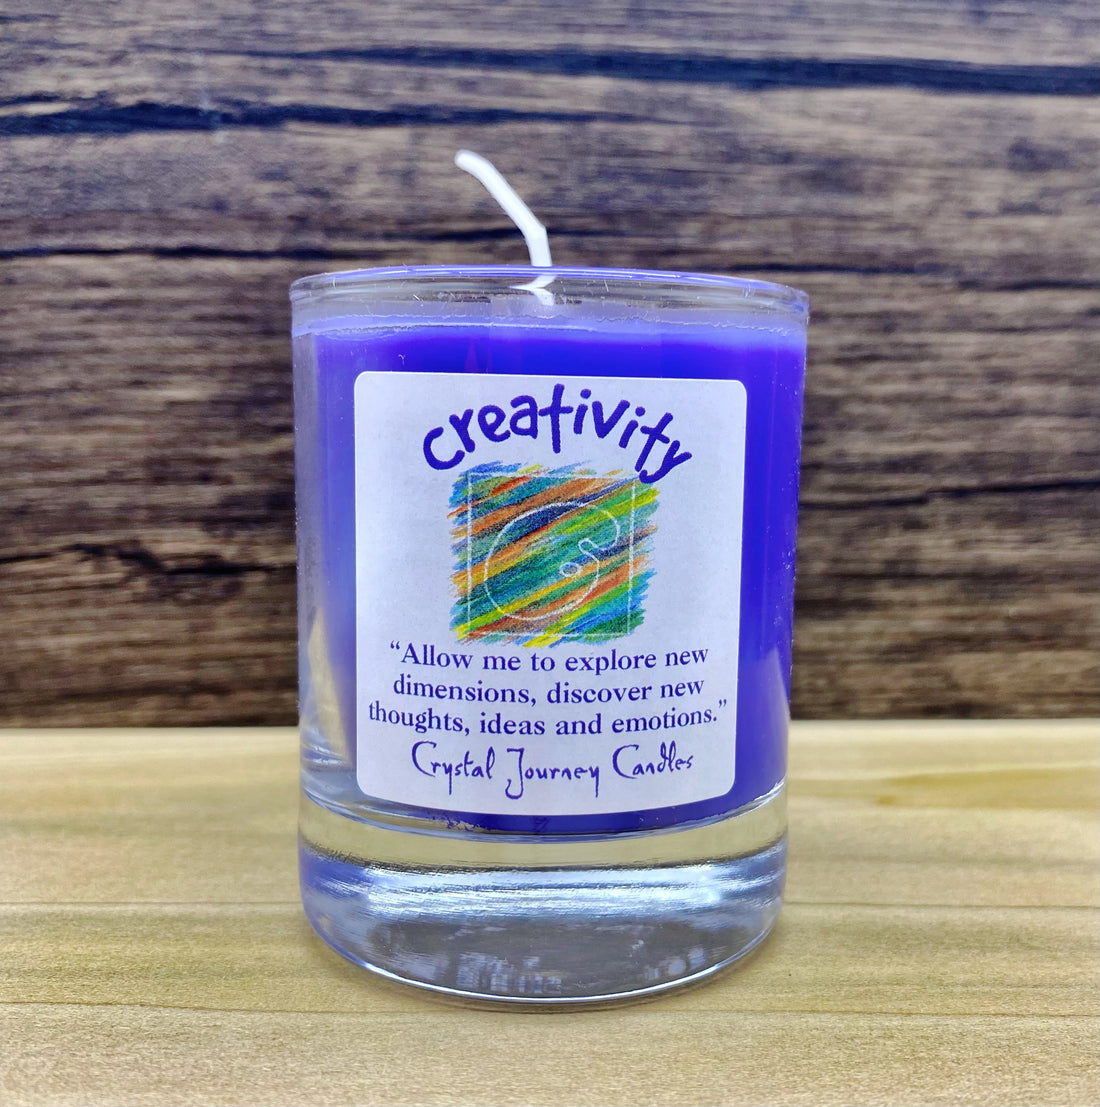 Soy Candle Creativity